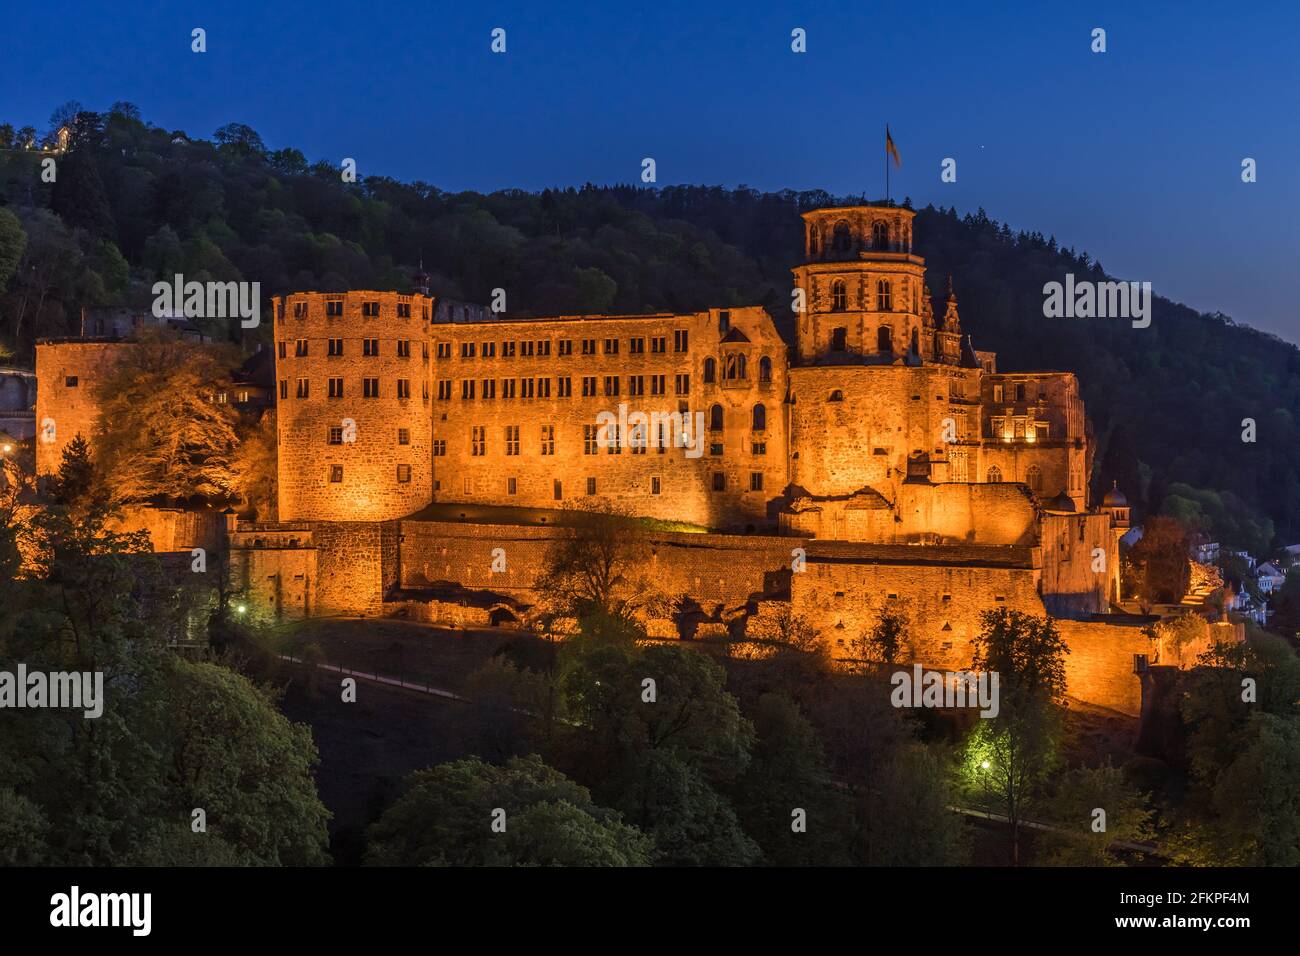 Illuminated Heidelberg castle after sunset, view from the palace garden Stock Photo